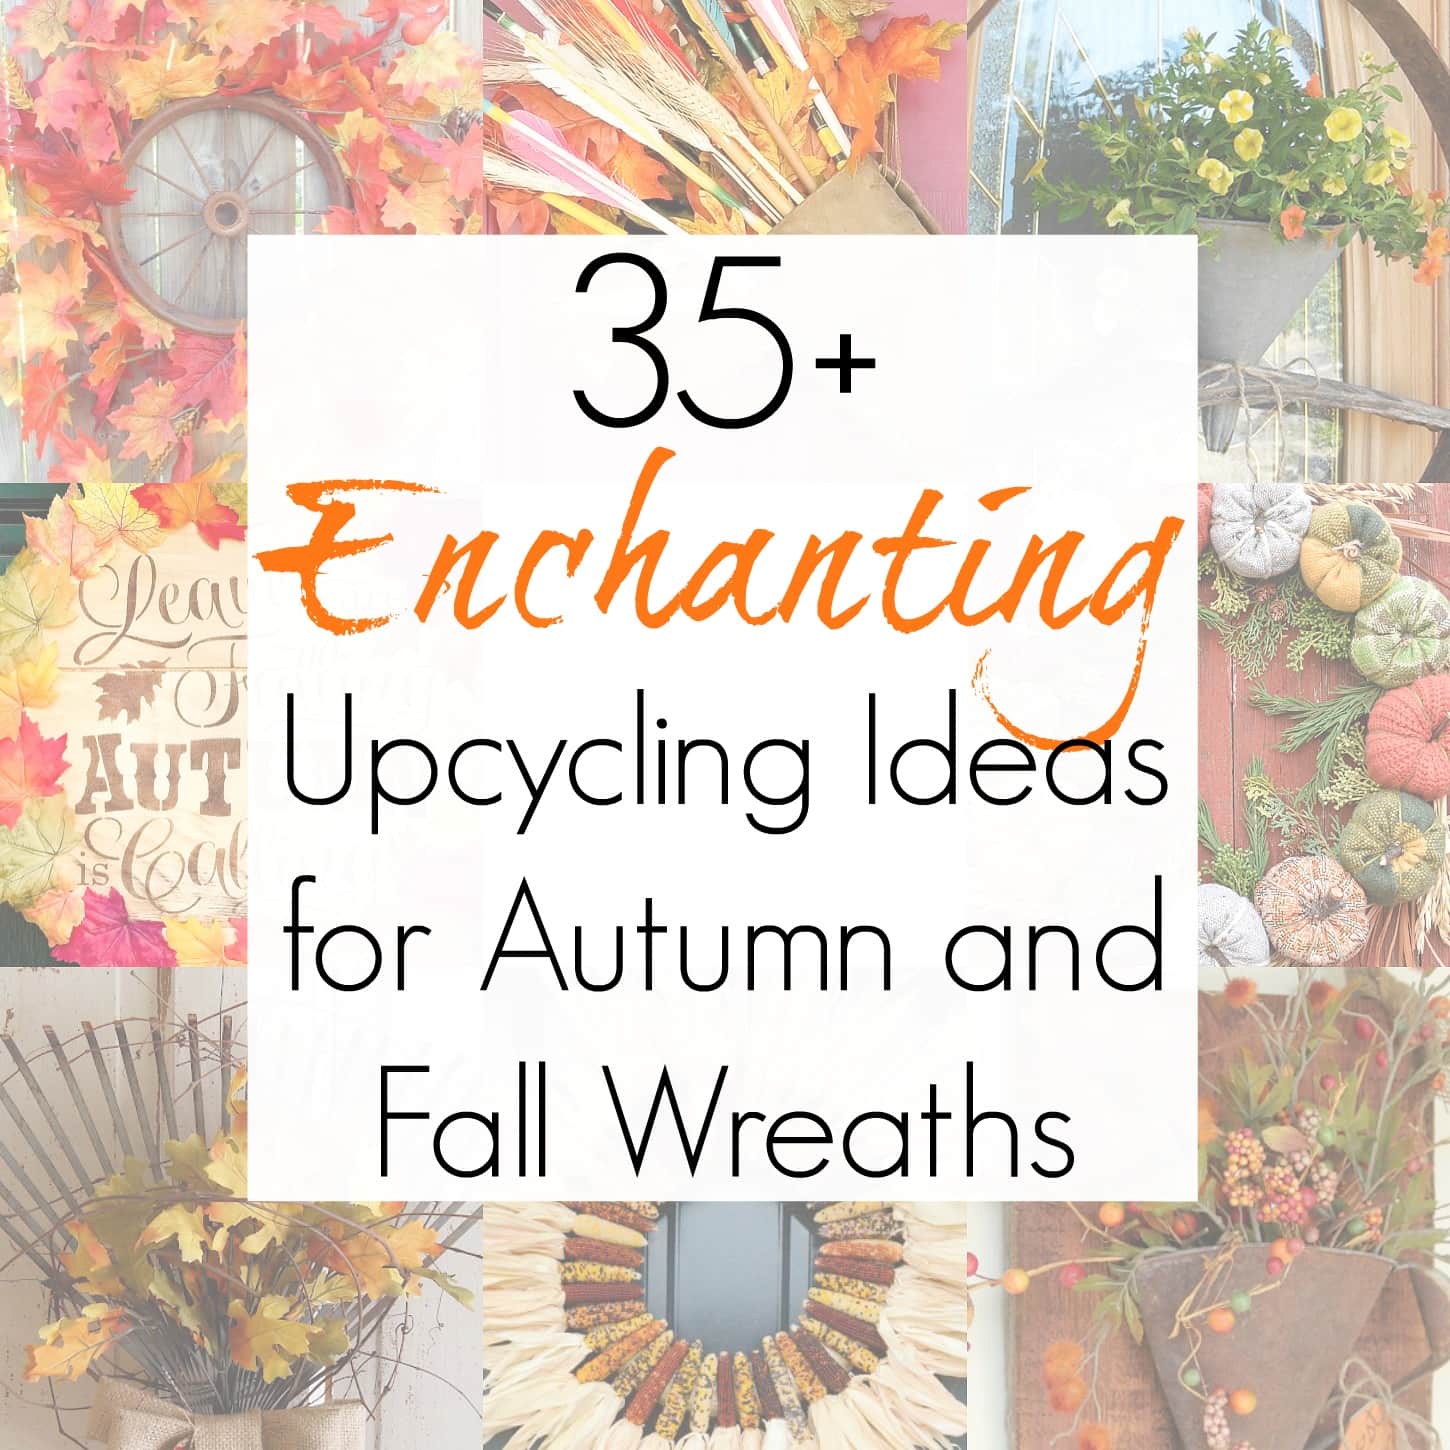 Fall wreath ideas and harvest wreaths from these upcycled craft ideas